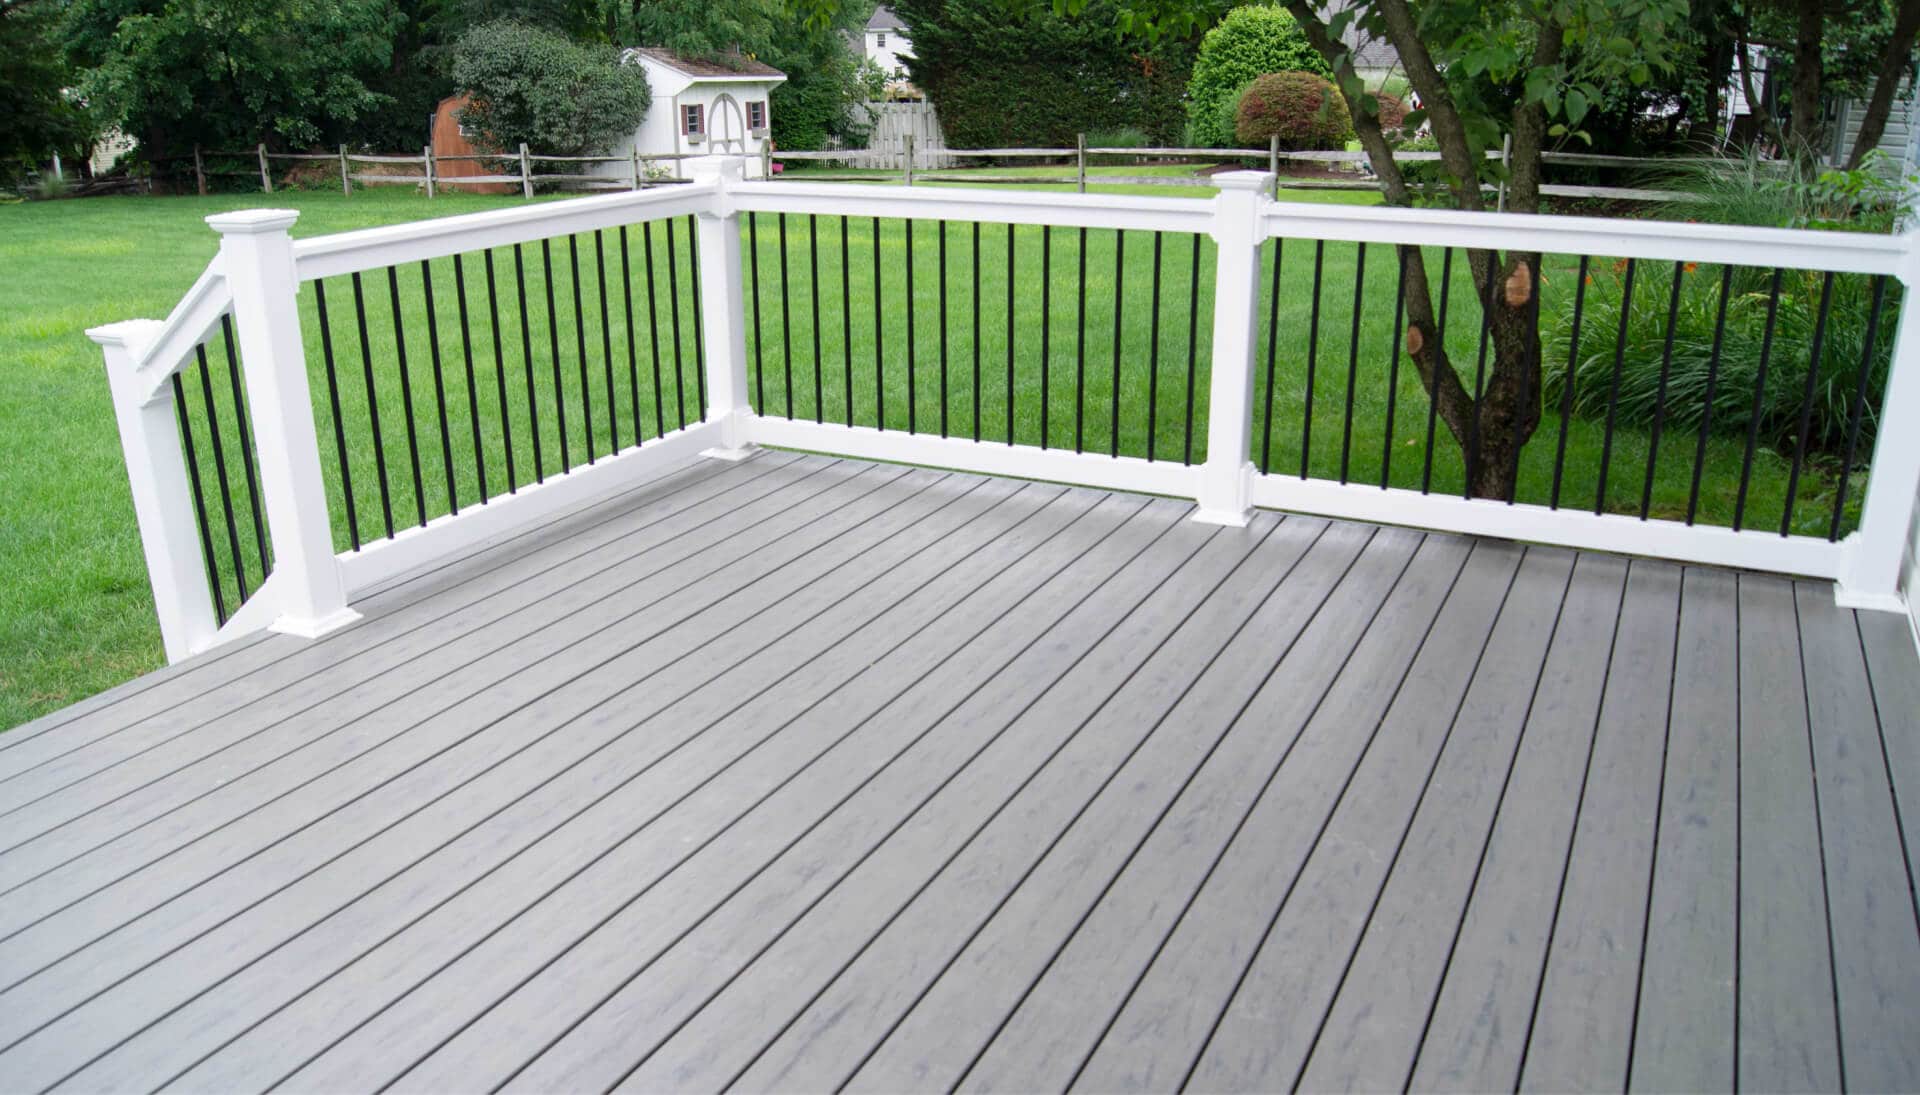 Specialists in deck railing and covers Everett, Washington